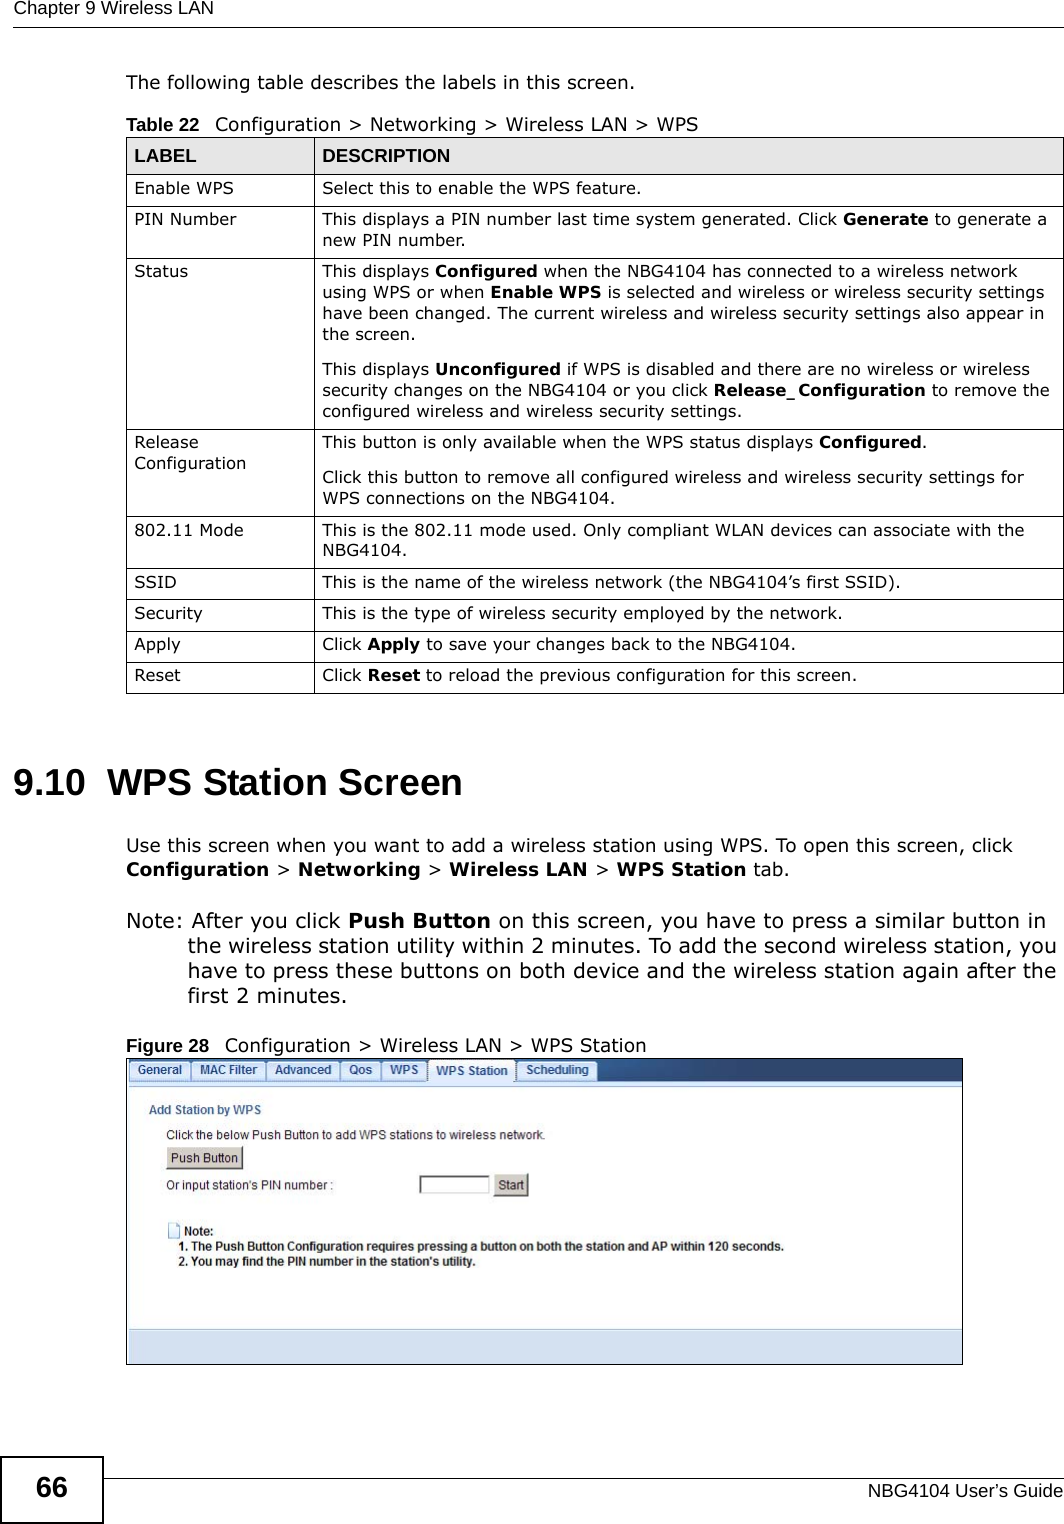 Chapter 9 Wireless LANNBG4104 User’s Guide66The following table describes the labels in this screen.9.10  WPS Station ScreenUse this screen when you want to add a wireless station using WPS. To open this screen, click Configuration &gt; Networking &gt; Wireless LAN &gt; WPS Station tab.Note: After you click Push Button on this screen, you have to press a similar button in the wireless station utility within 2 minutes. To add the second wireless station, you have to press these buttons on both device and the wireless station again after the first 2 minutes.Figure 28   Configuration &gt; Wireless LAN &gt; WPS StationTable 22   Configuration &gt; Networking &gt; Wireless LAN &gt; WPSLABEL DESCRIPTIONEnable WPS Select this to enable the WPS feature.PIN Number This displays a PIN number last time system generated. Click Generate to generate a new PIN number.Status This displays Configured when the NBG4104 has connected to a wireless network using WPS or when Enable WPS is selected and wireless or wireless security settings have been changed. The current wireless and wireless security settings also appear in the screen.This displays Unconfigured if WPS is disabled and there are no wireless or wireless security changes on the NBG4104 or you click Release_Configuration to remove the configured wireless and wireless security settings.Release ConfigurationThis button is only available when the WPS status displays Configured.Click this button to remove all configured wireless and wireless security settings for WPS connections on the NBG4104.802.11 Mode This is the 802.11 mode used. Only compliant WLAN devices can associate with the NBG4104.SSID This is the name of the wireless network (the NBG4104’s first SSID).Security This is the type of wireless security employed by the network.Apply Click Apply to save your changes back to the NBG4104.Reset Click Reset to reload the previous configuration for this screen.